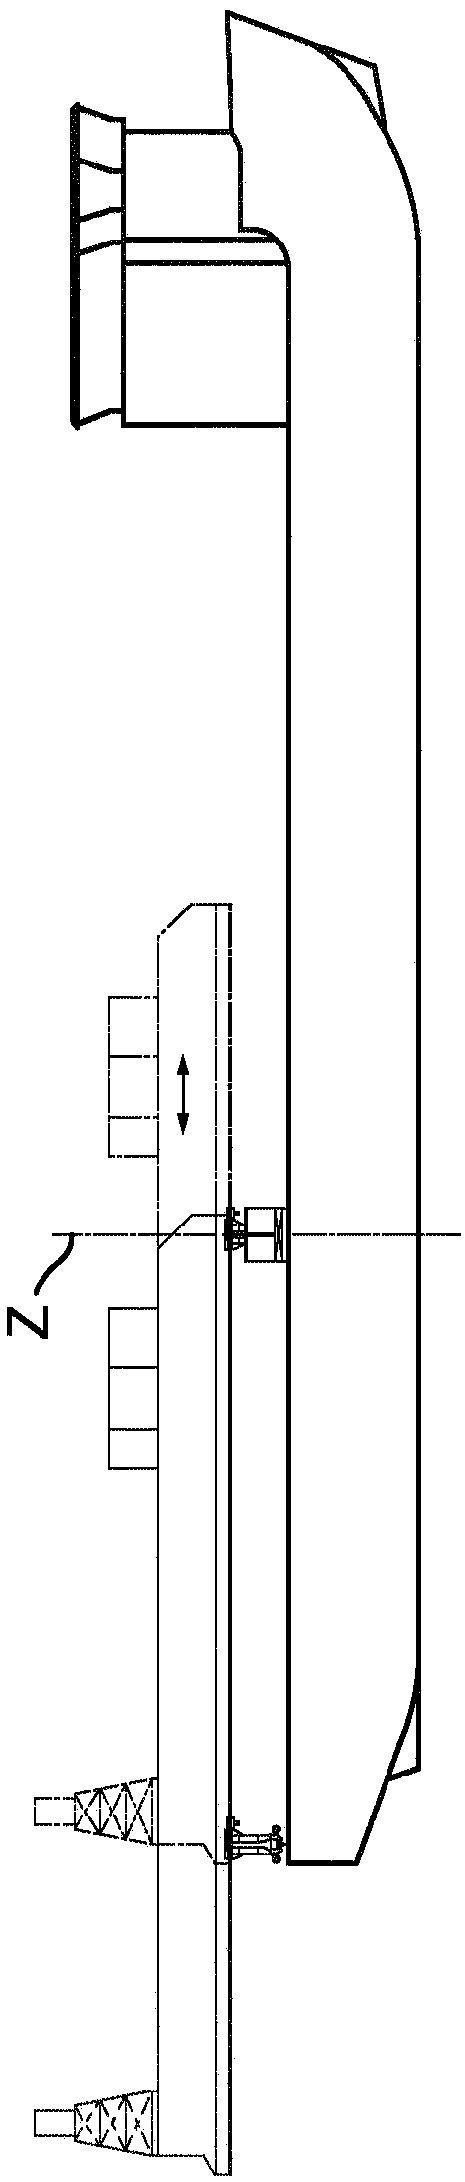 Offshore structure, supporting member, skid shoe, and method for moving cantilever